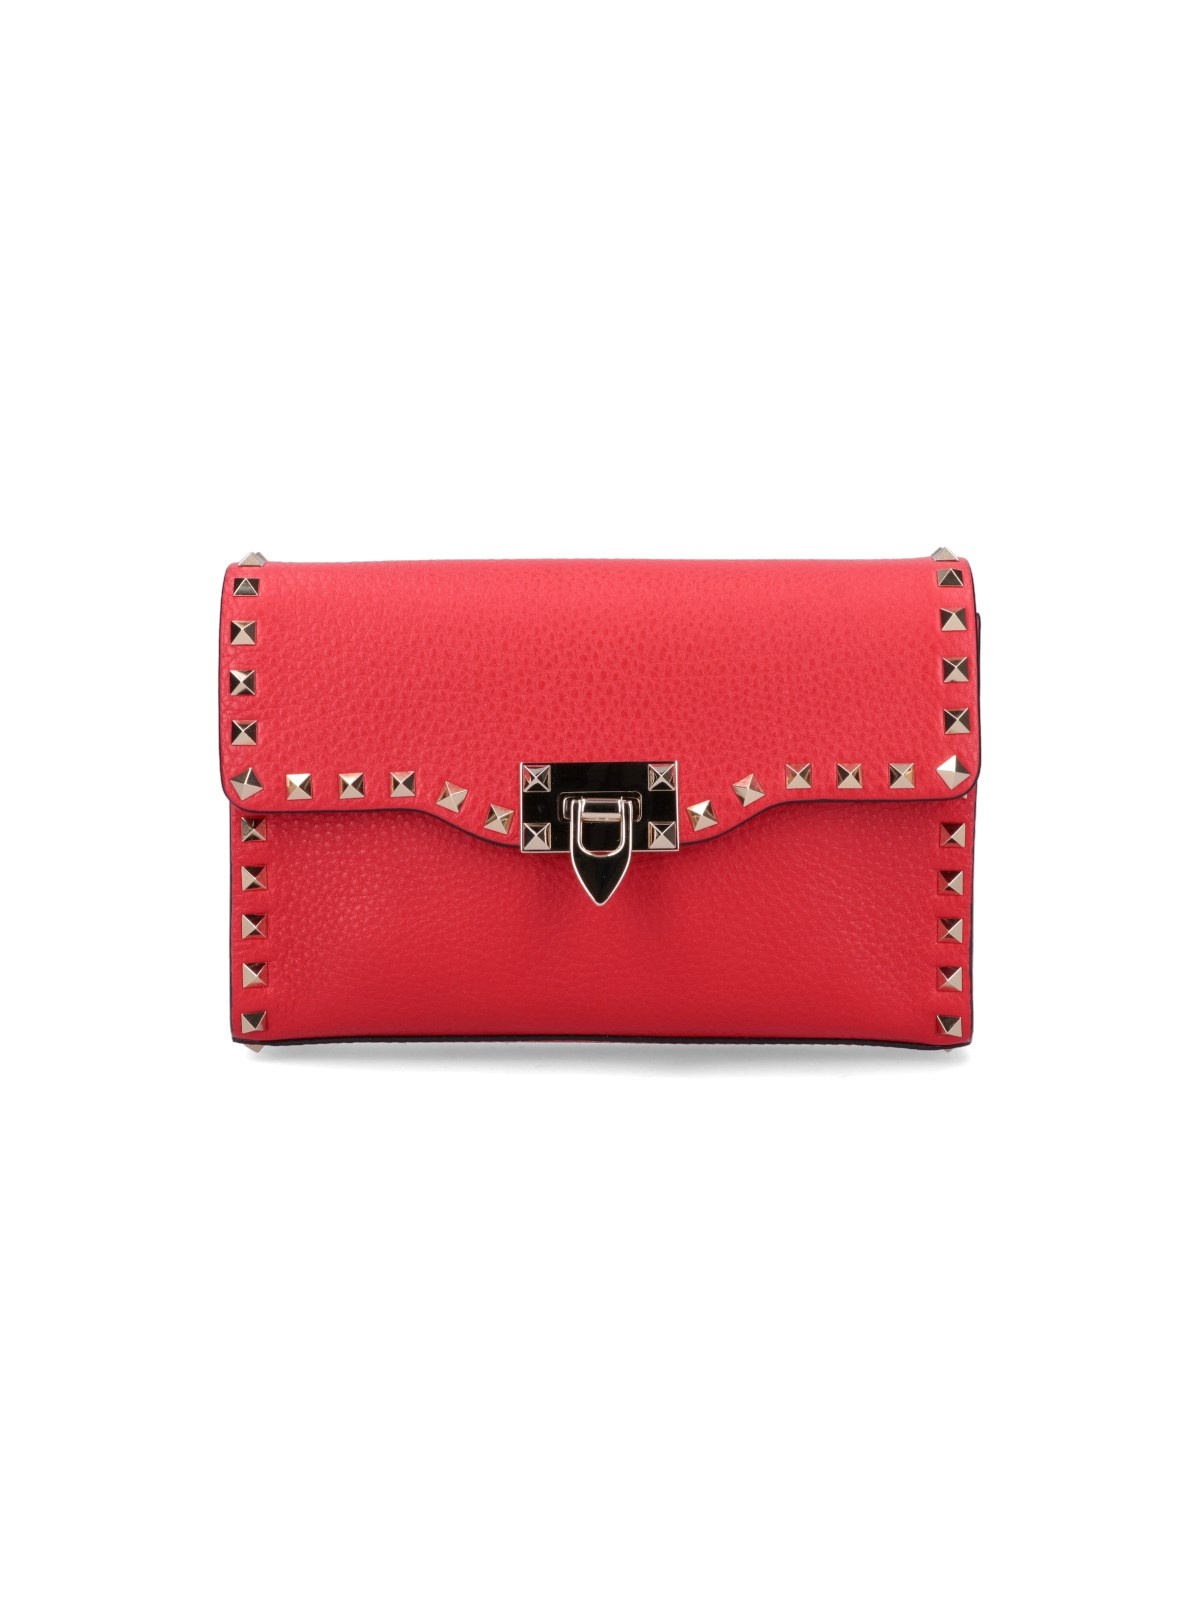 VALENTINO ROCKSTUD BAG in Sugared Pink Leather Chain Shoulder 